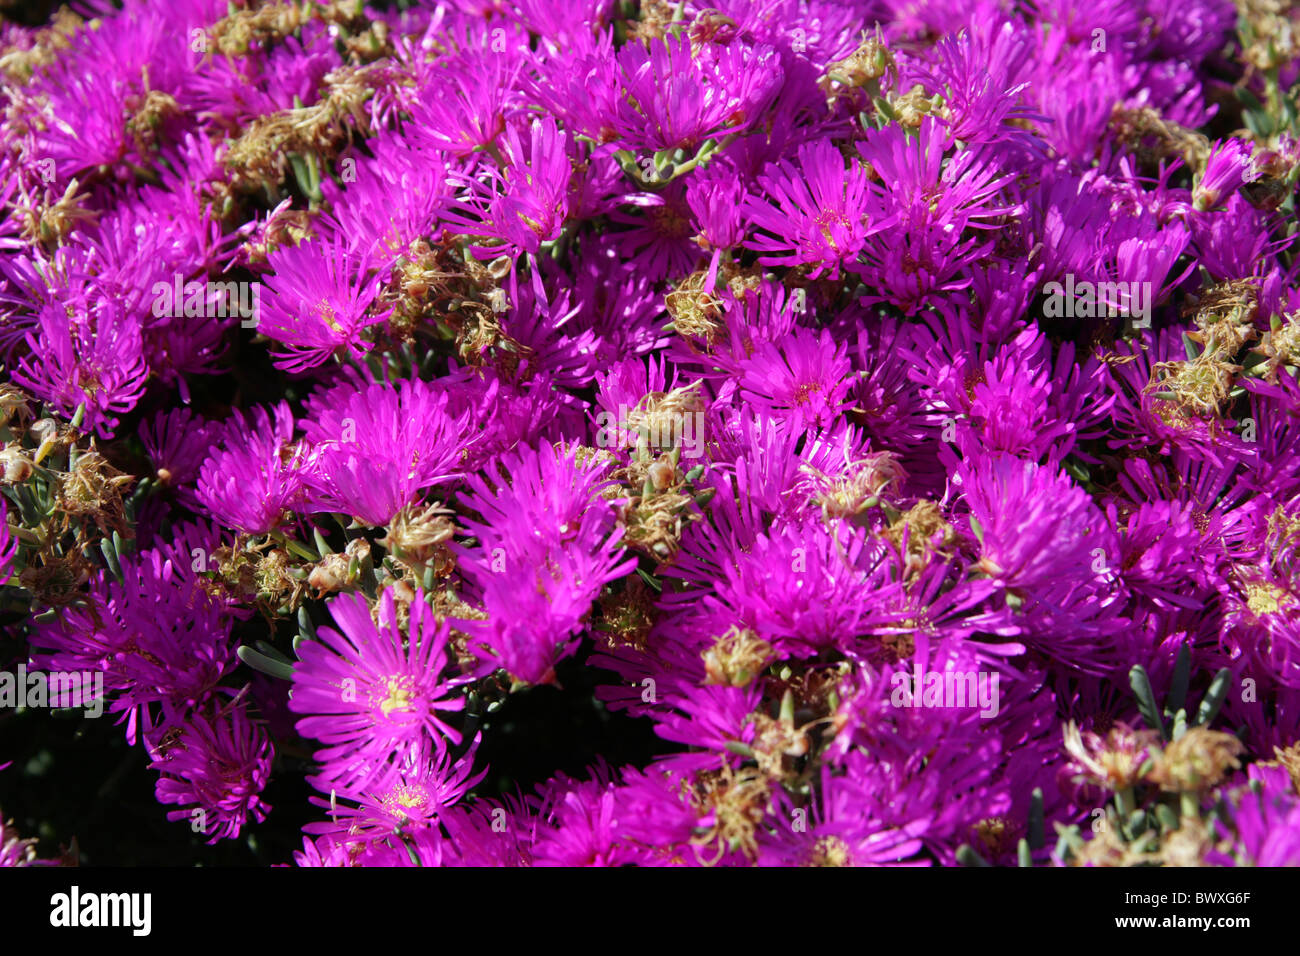 Rosae Ice Plant, Drosanthemum hispidum, Aizoaceae. Plettenberg, South Africa. They are known commonly as dewflowers or vygies. Stock Photo